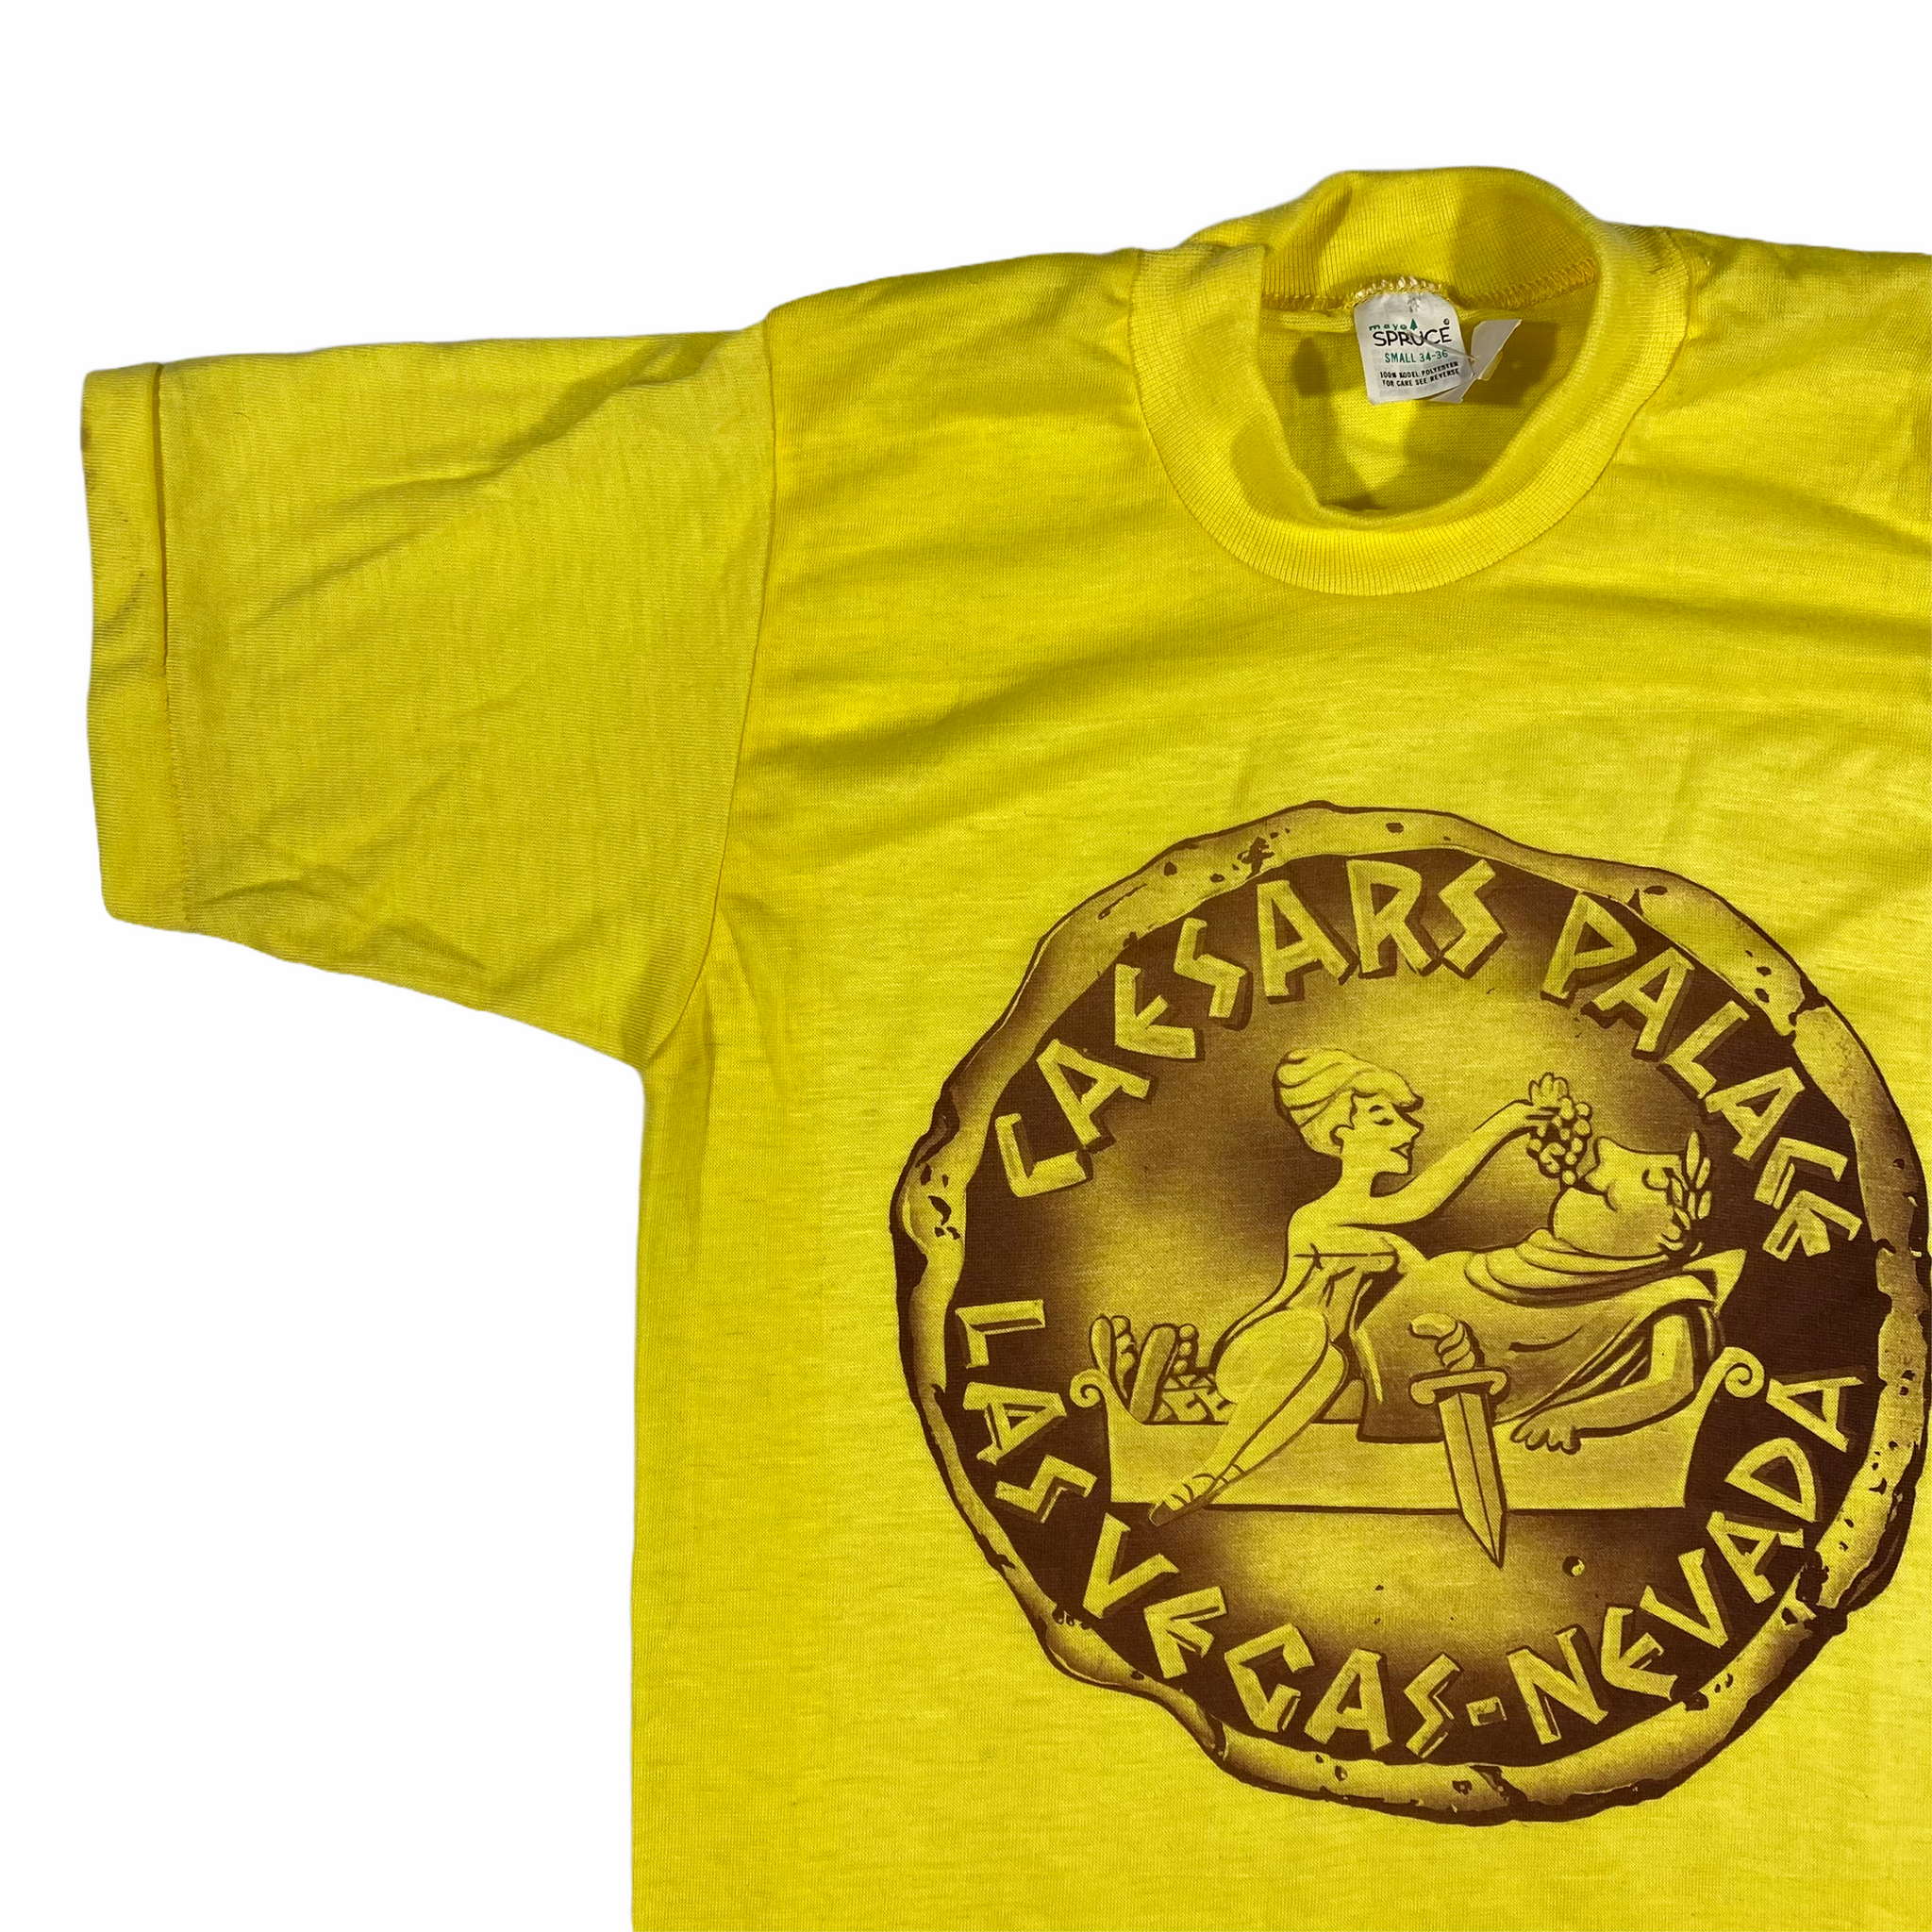 70s Caesar’s palace tee. Built with the teamsters pension fund. when wise guys ran vegas Small